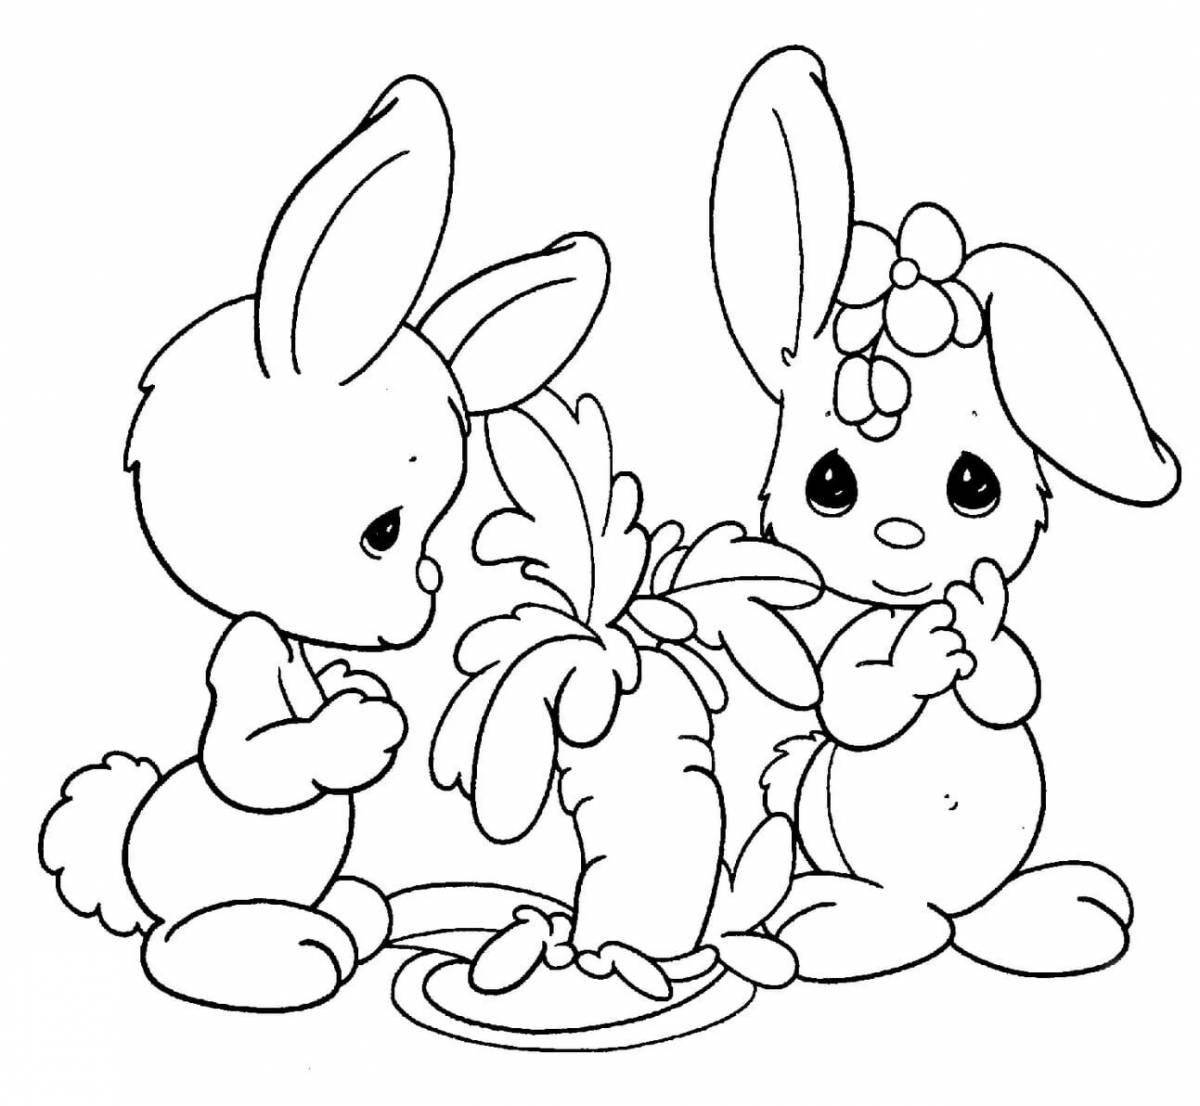 Amazing rabbit and cat coloring pages